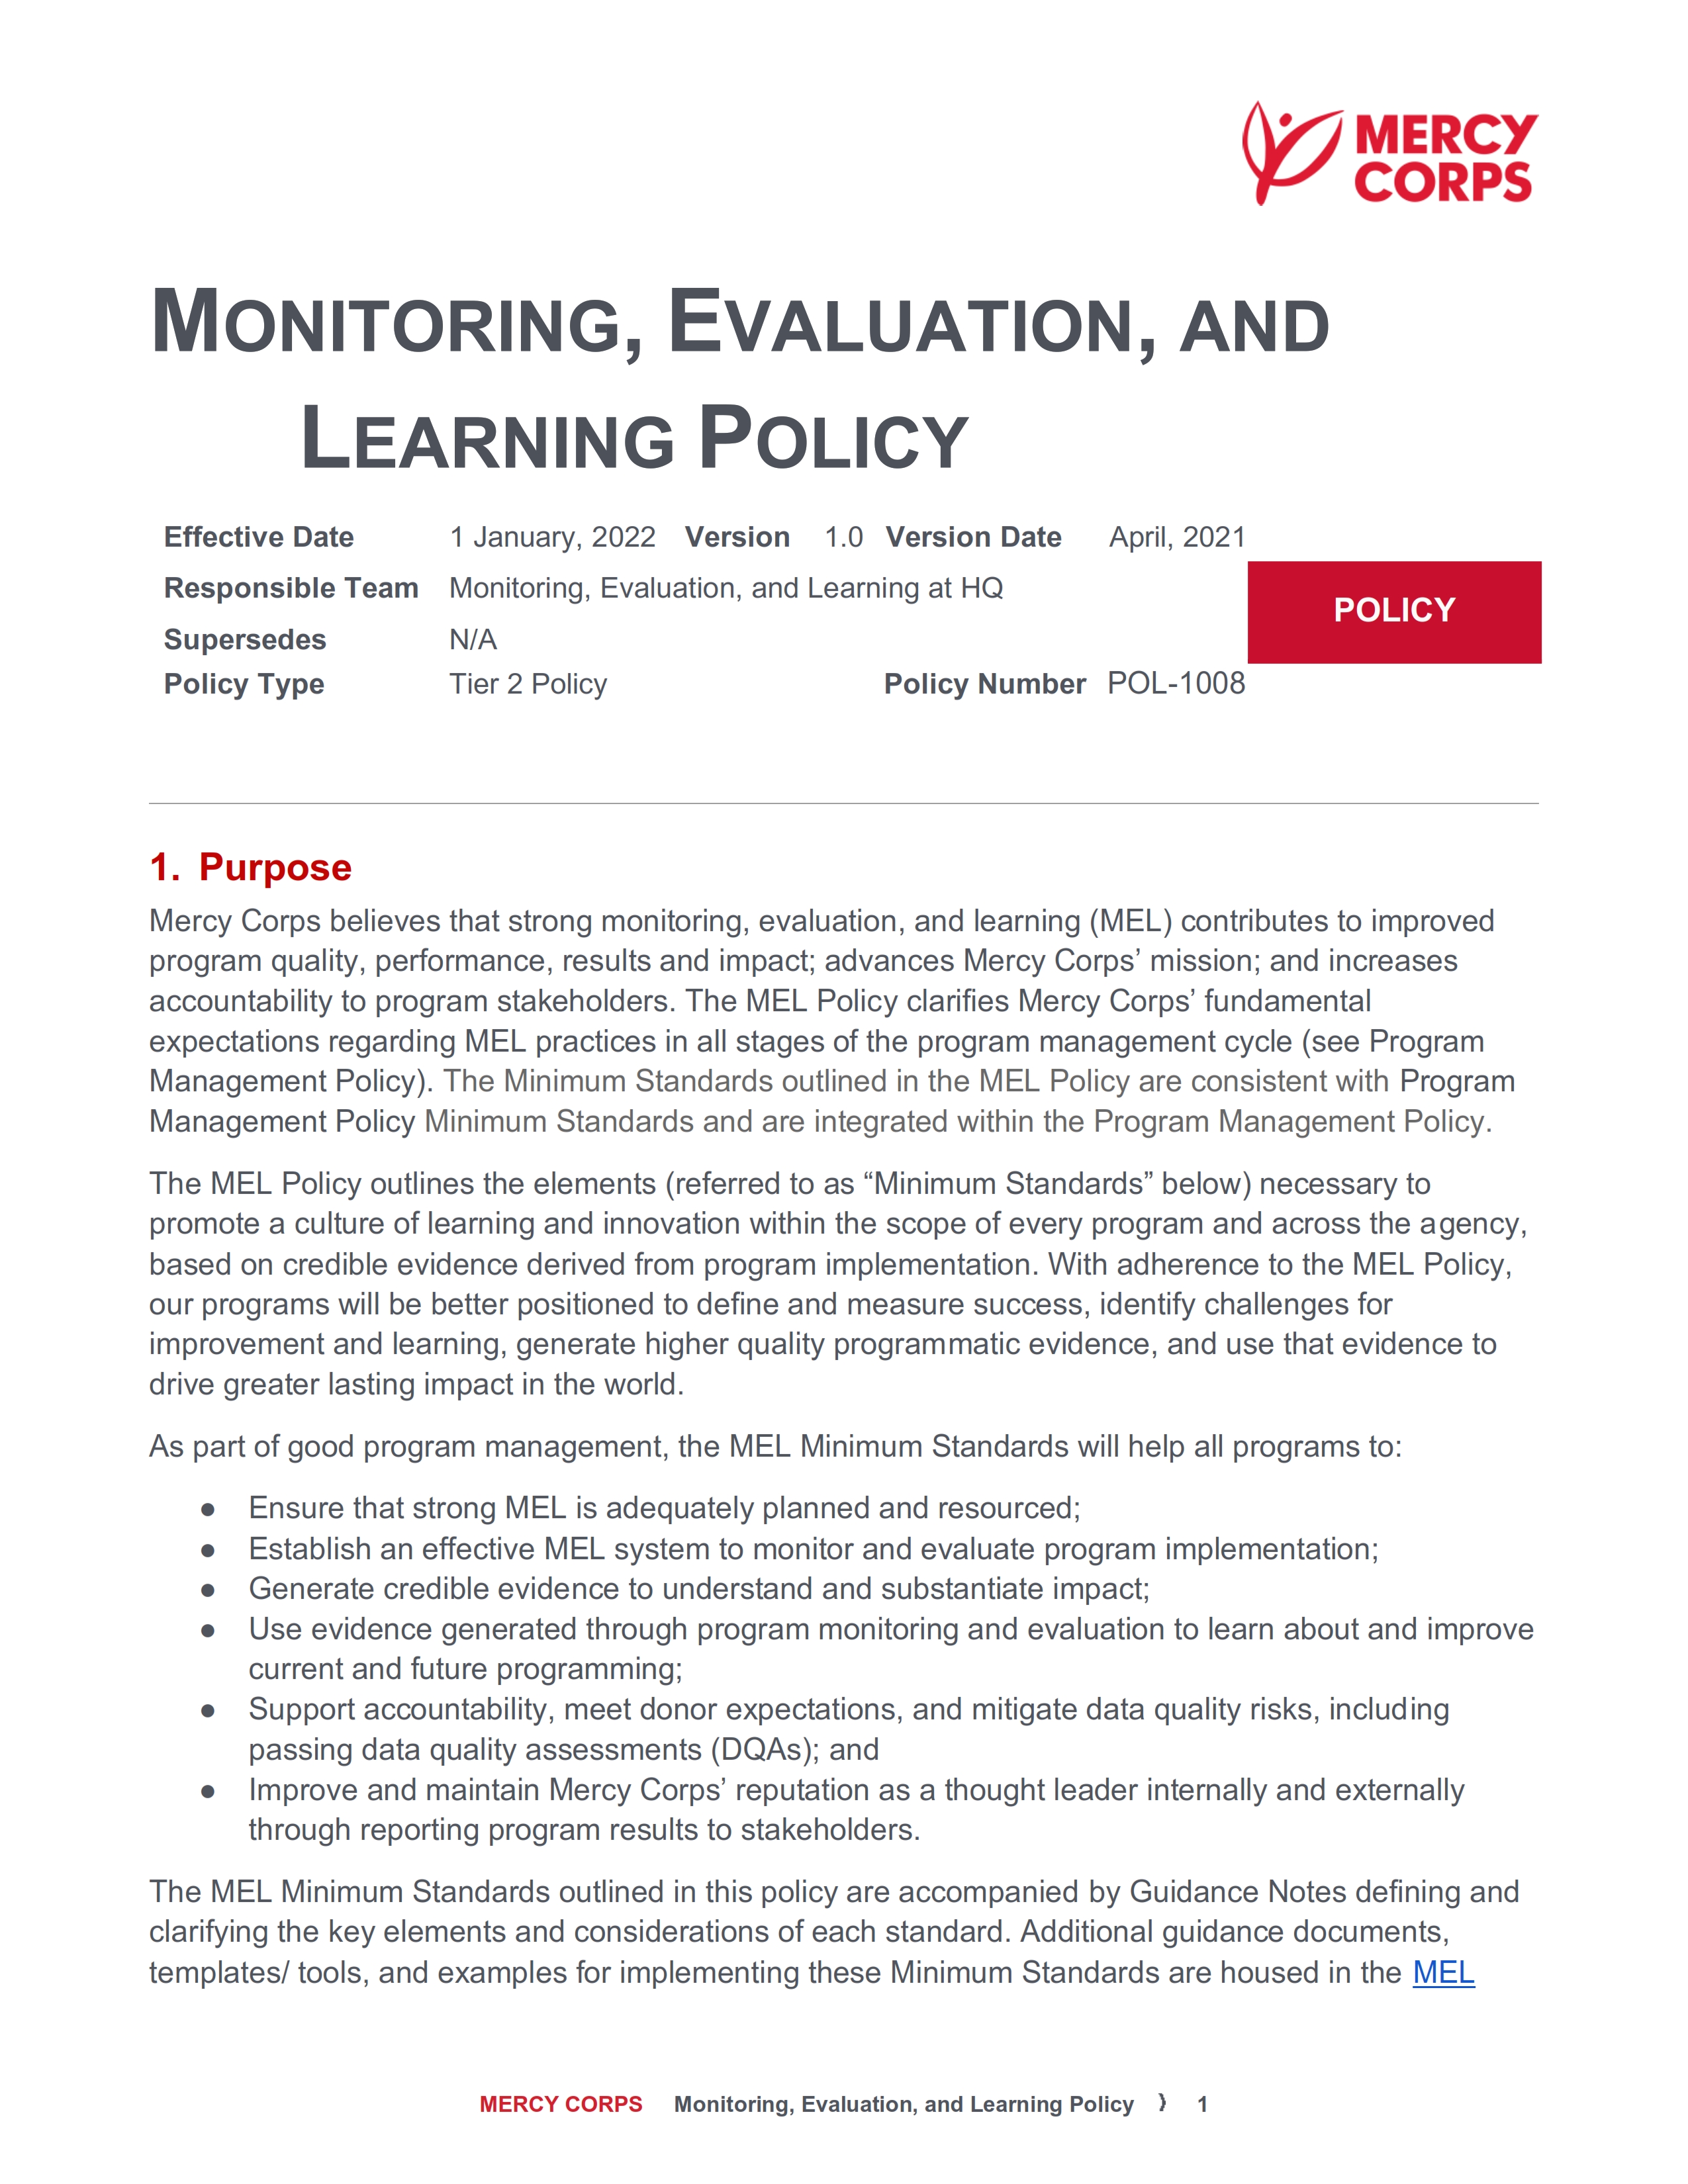 MONITORING, EVALUATION, AND LEARNING POLICY 